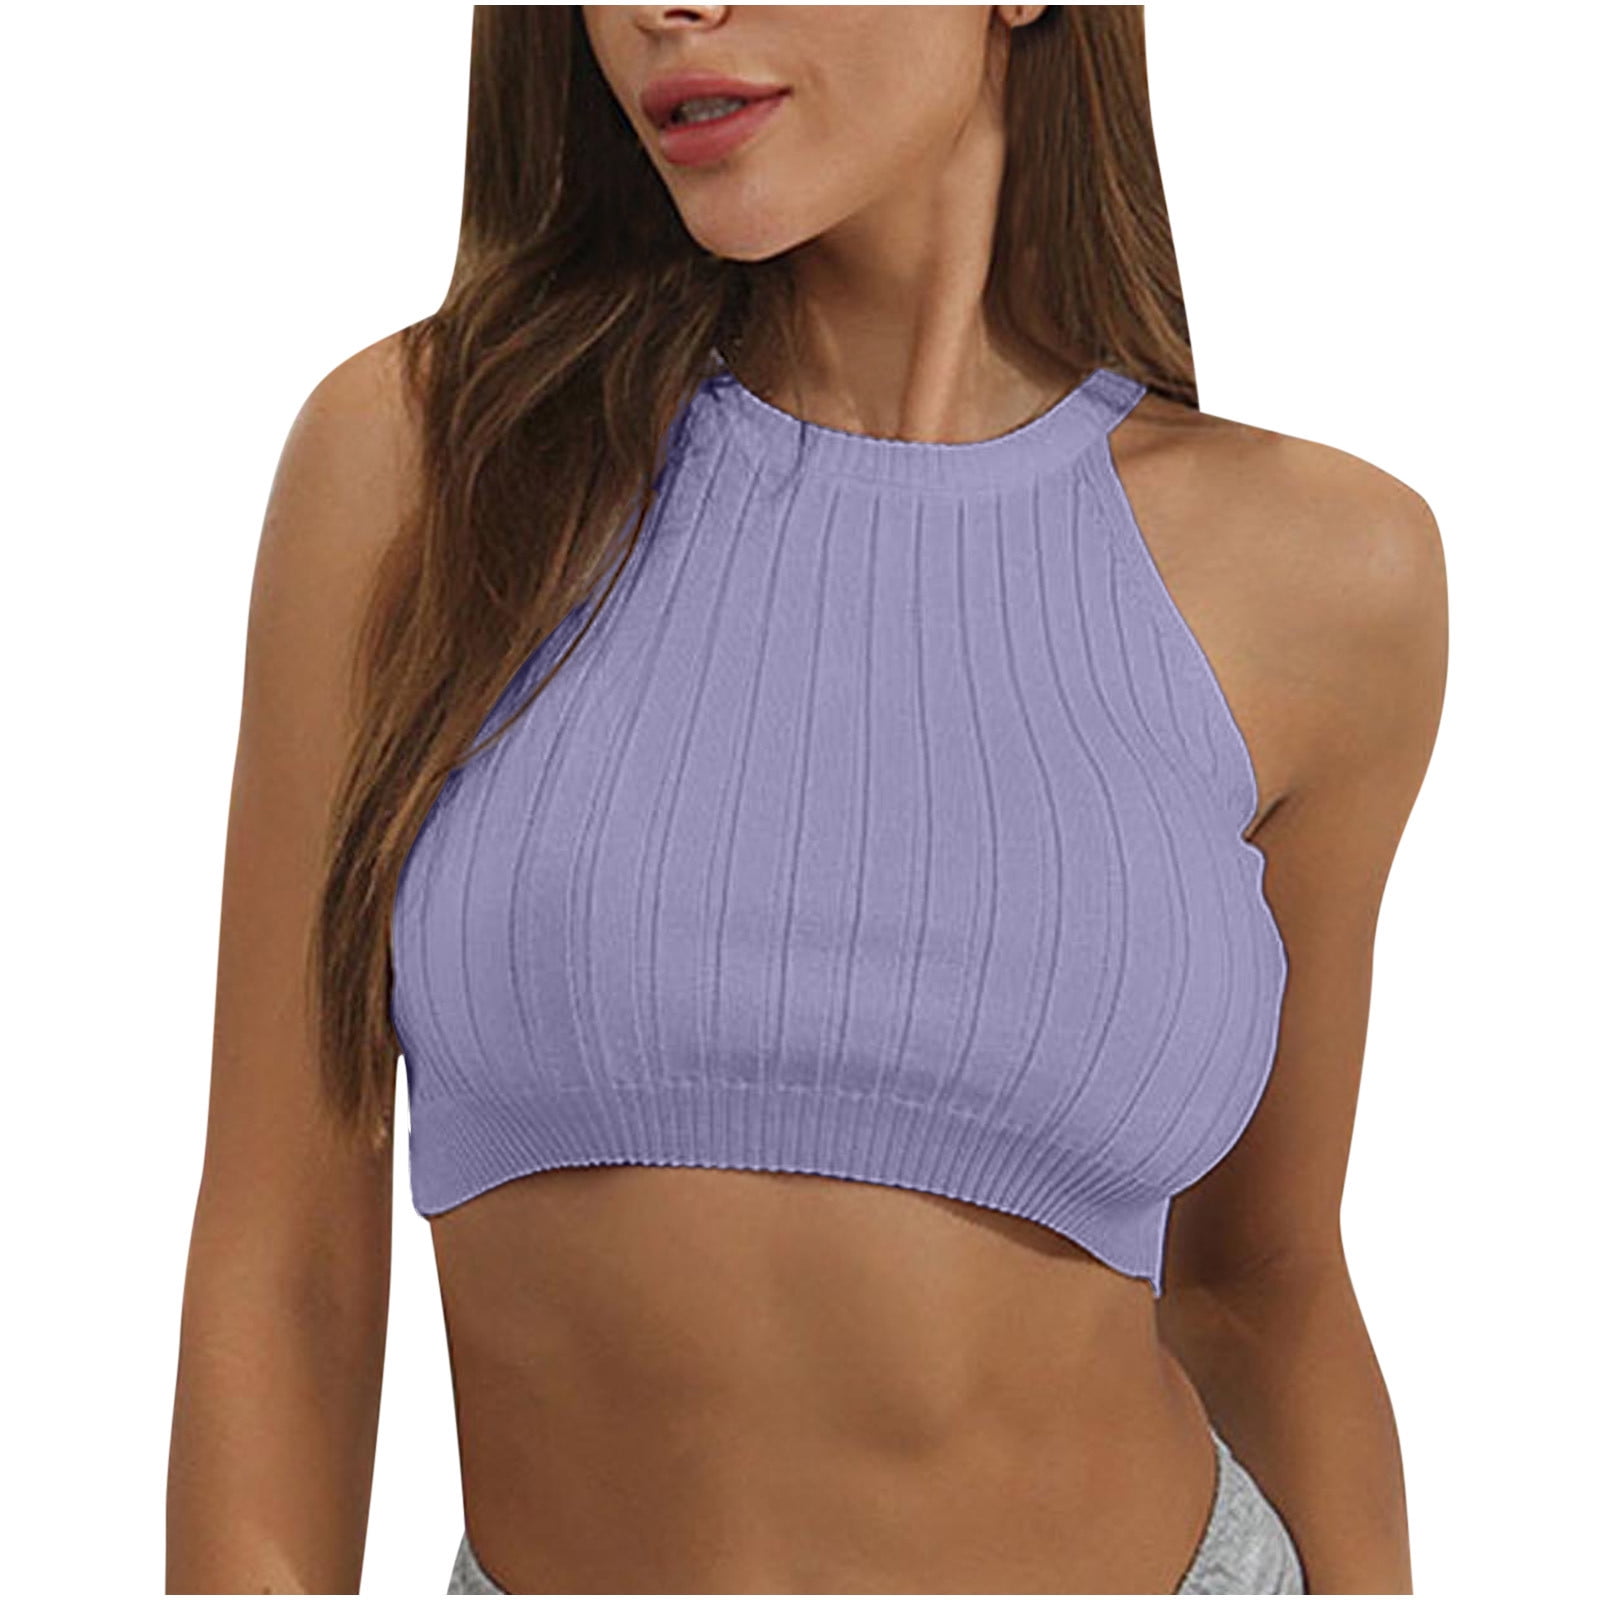 Cathalem Cotton Tank Top Women Sexy Sweetheart Neck Going Out Crop Top Cute  Y2K Pleated Strappy Vest Cami Shirt,Purple S